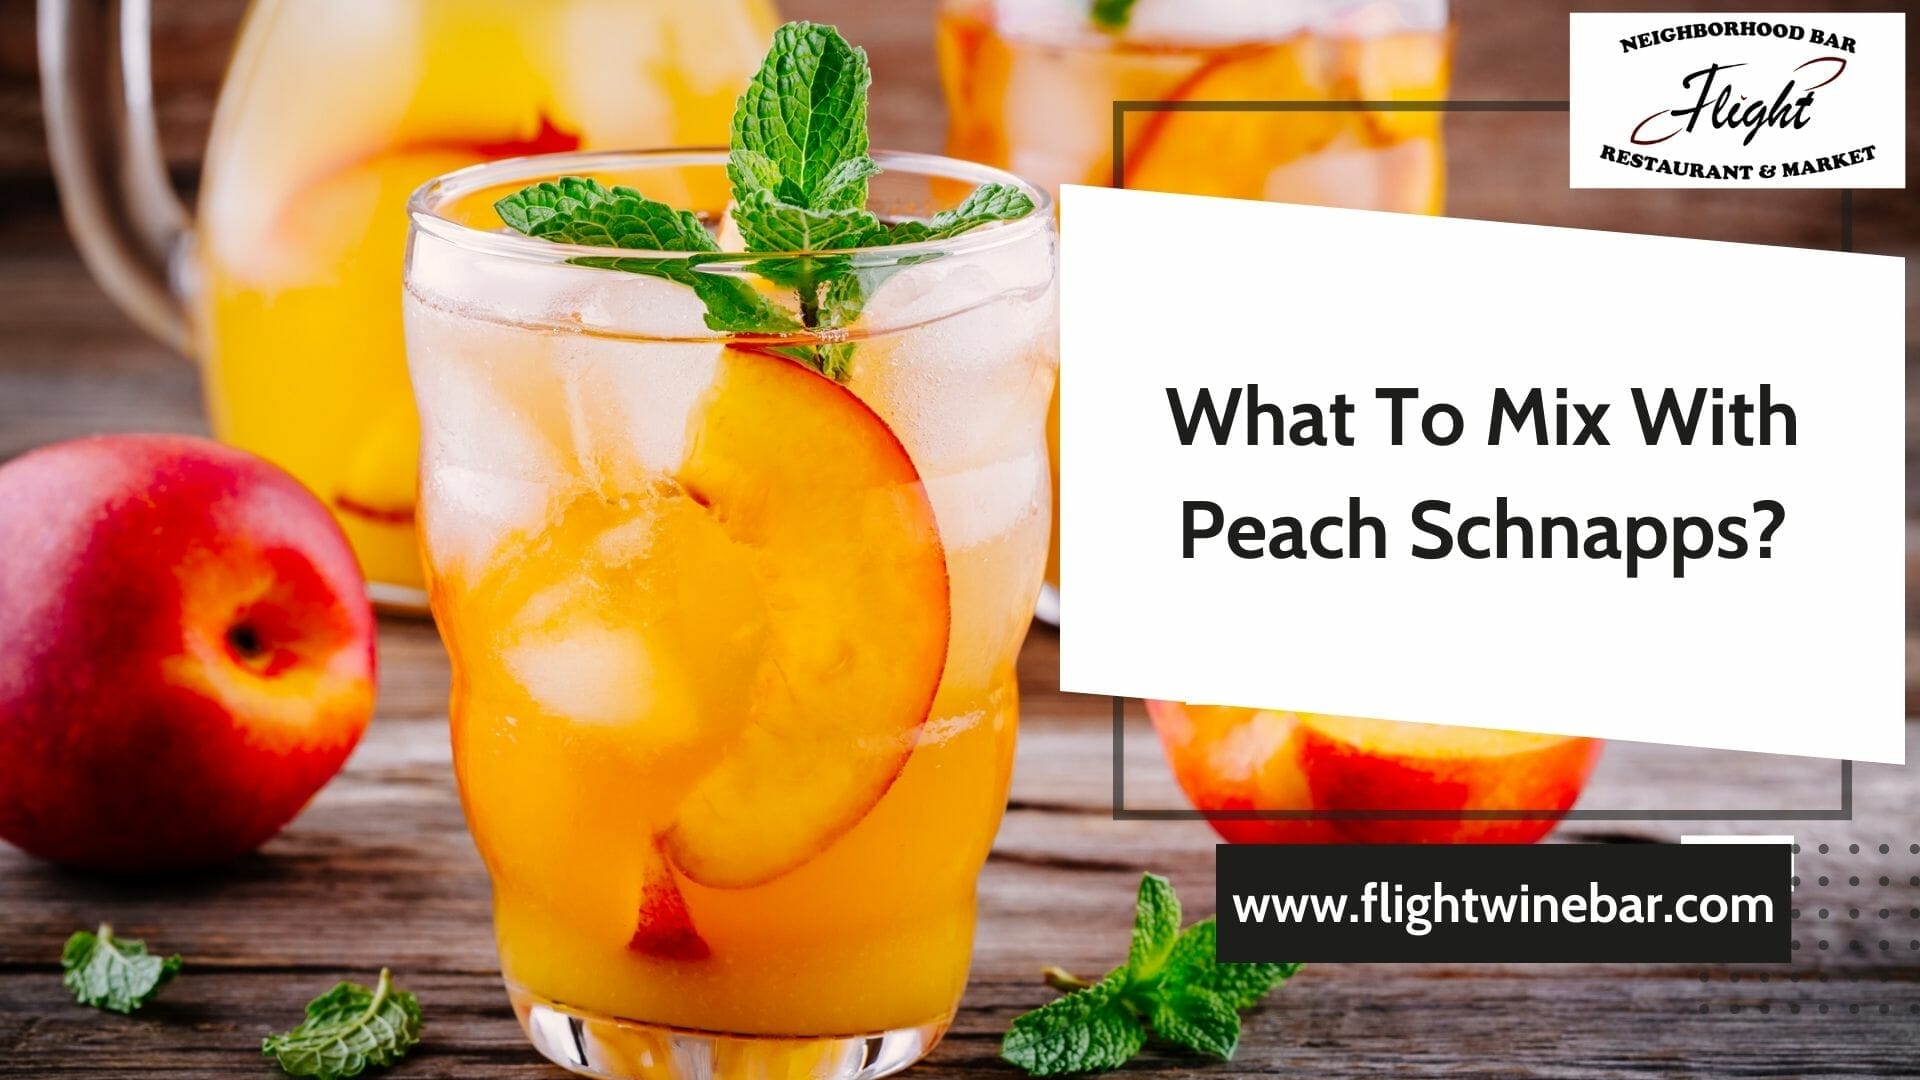 What To Mix With Peach Schnapps